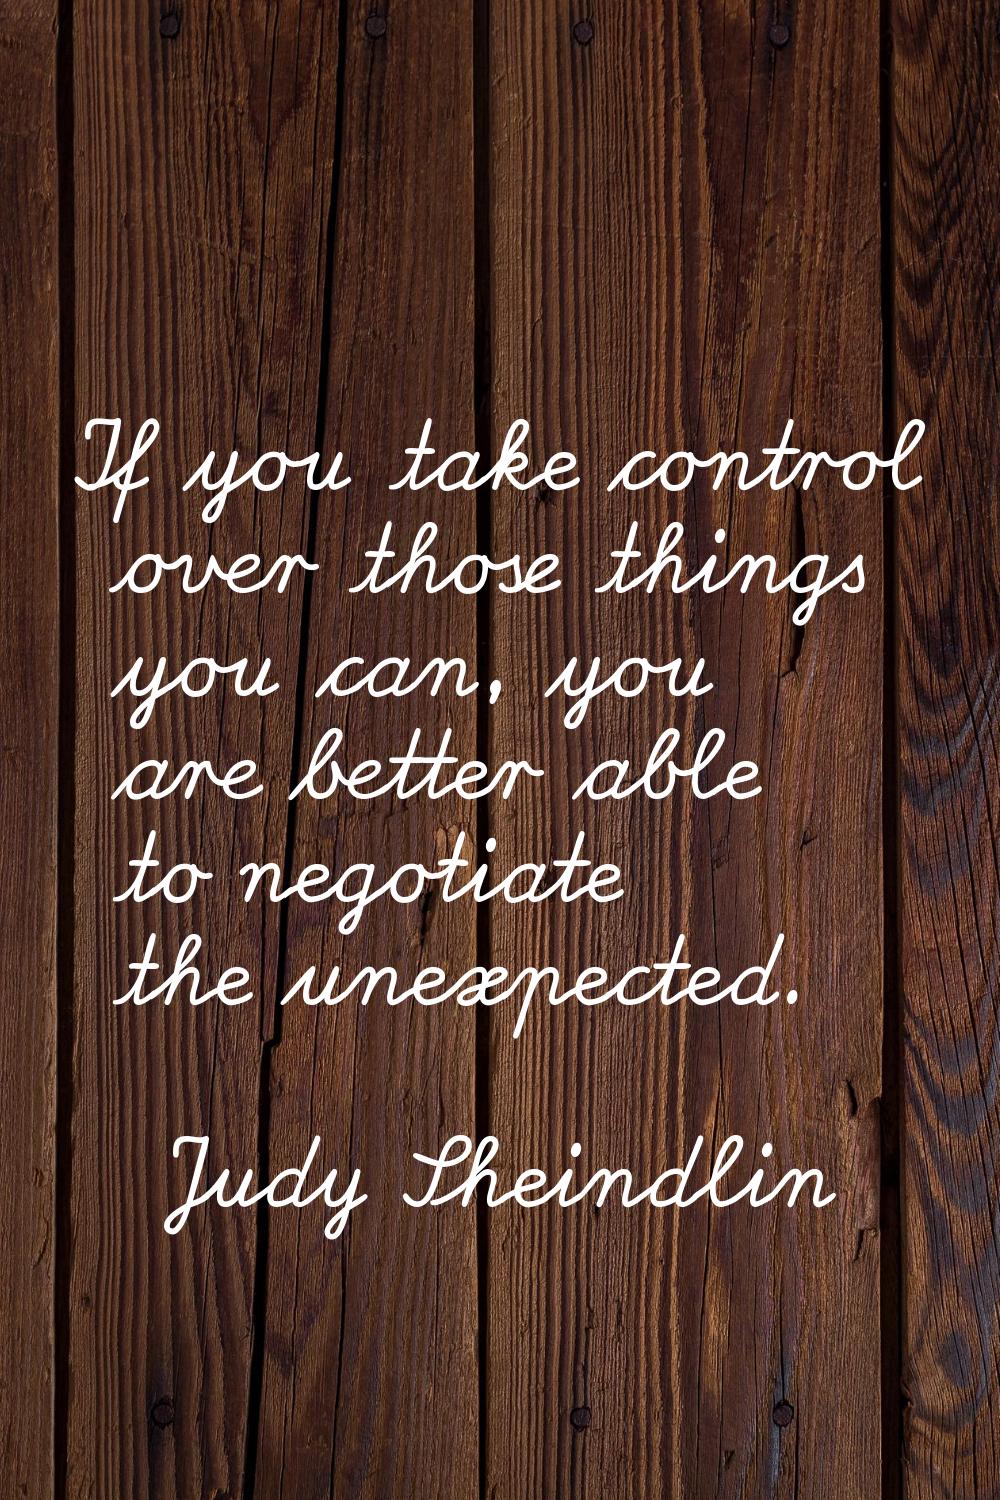 If you take control over those things you can, you are better able to negotiate the unexpected.